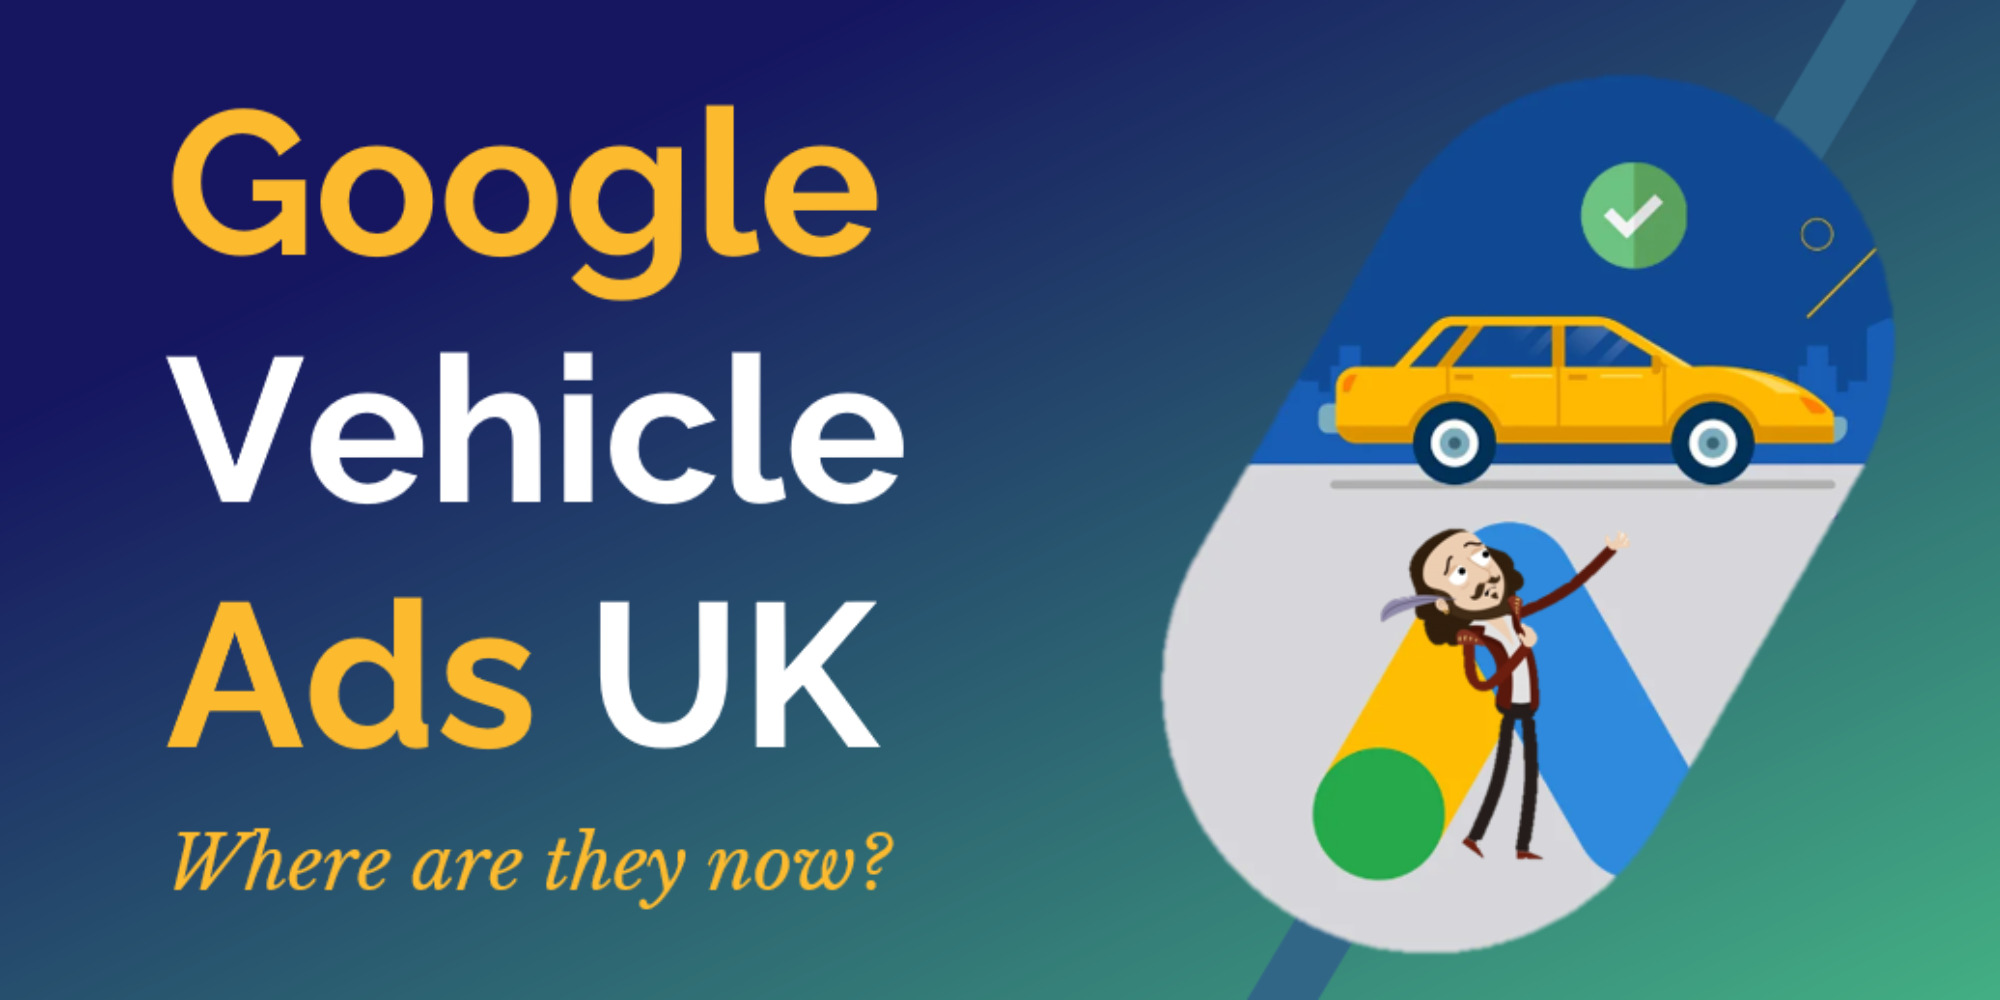 Google Vehicle Ads UK: Where are they now?